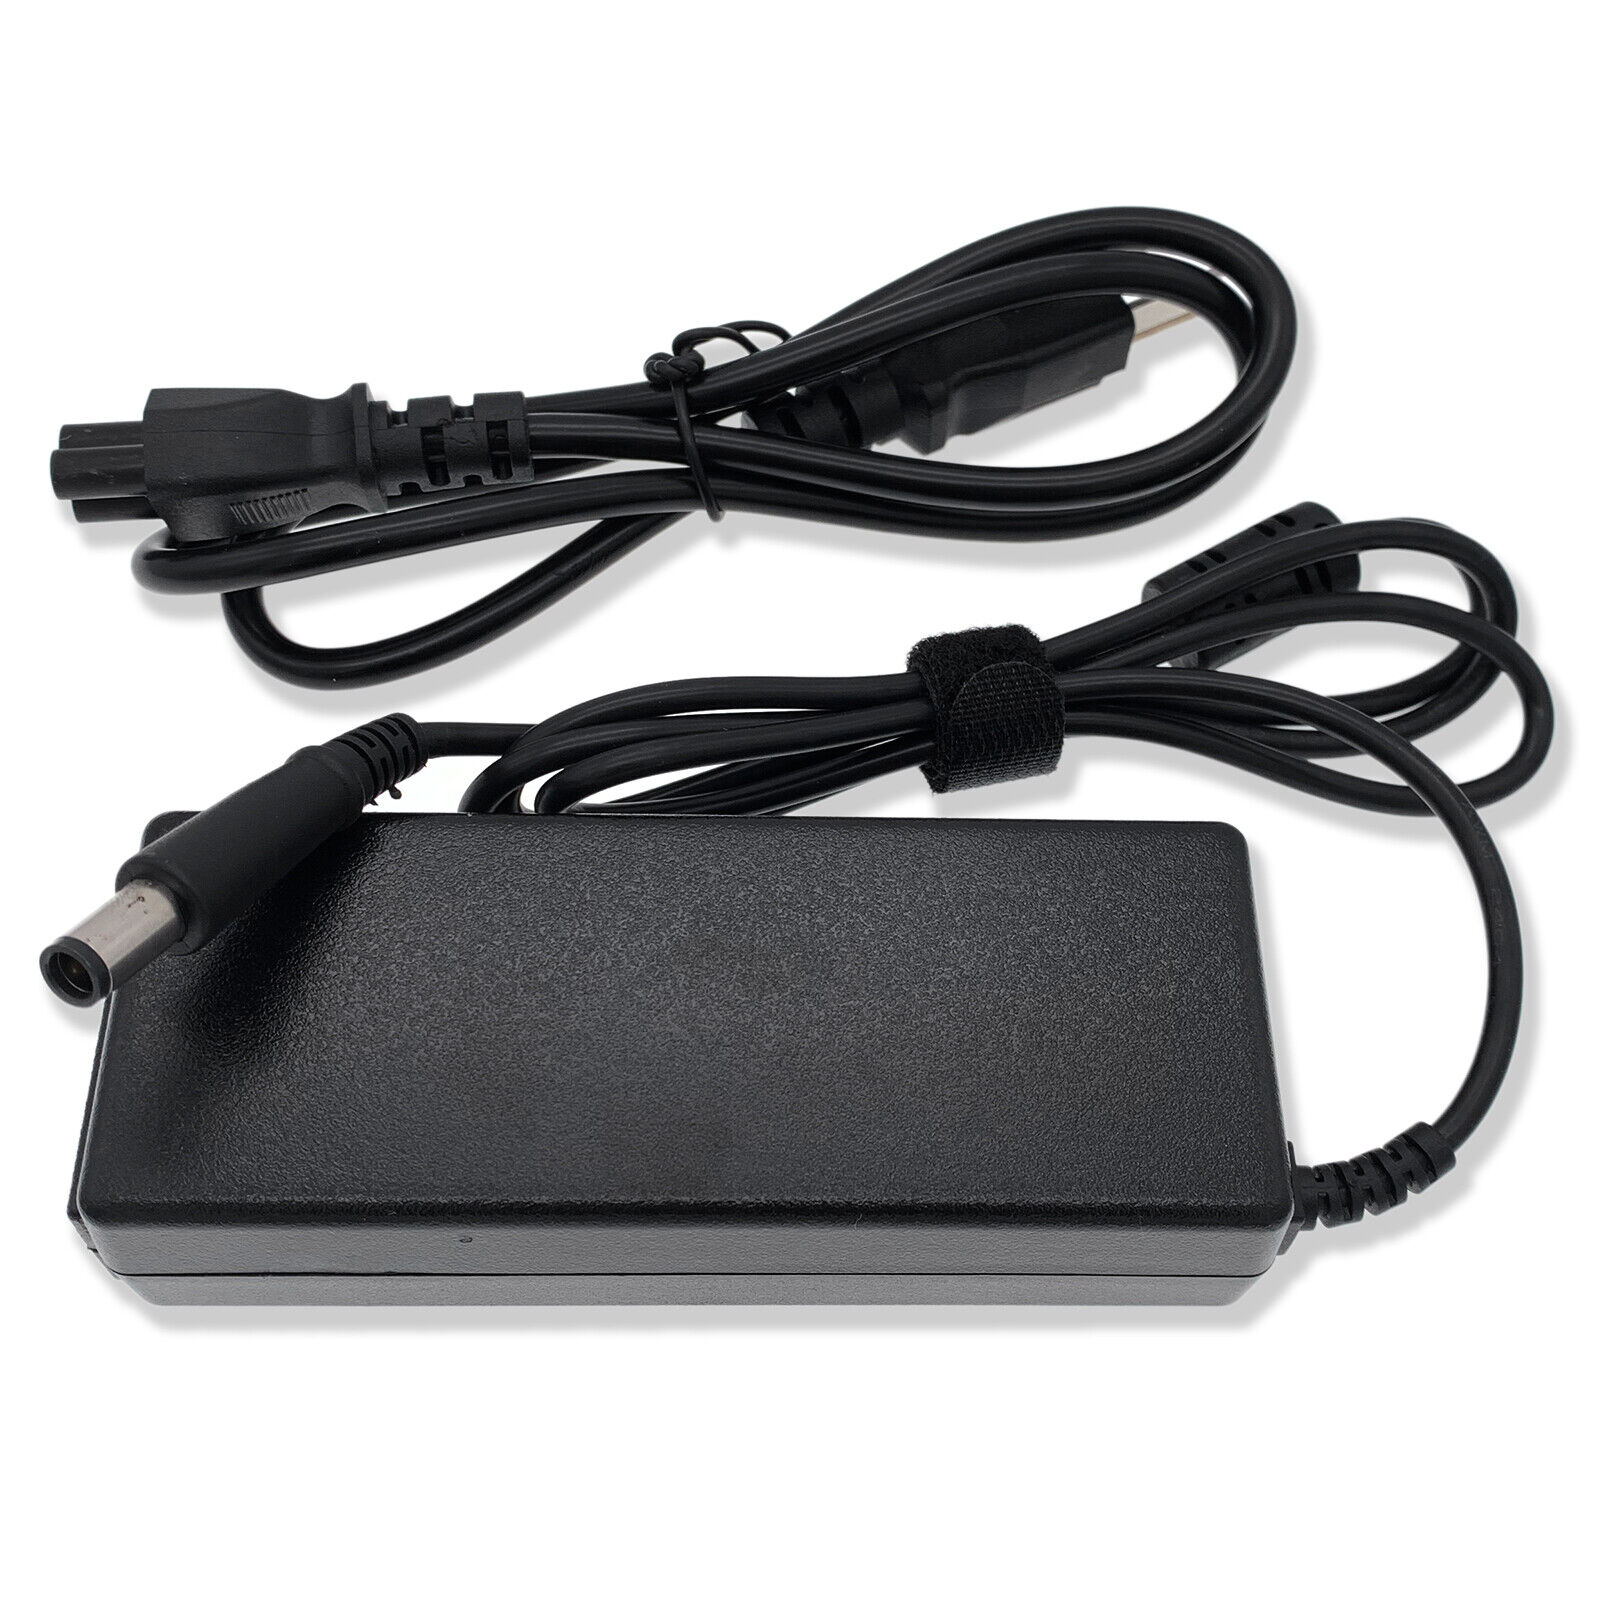 90W New AC Adapter Charger For HP Pavilion dv7-3065DX dv7-3165DX Laptop Power